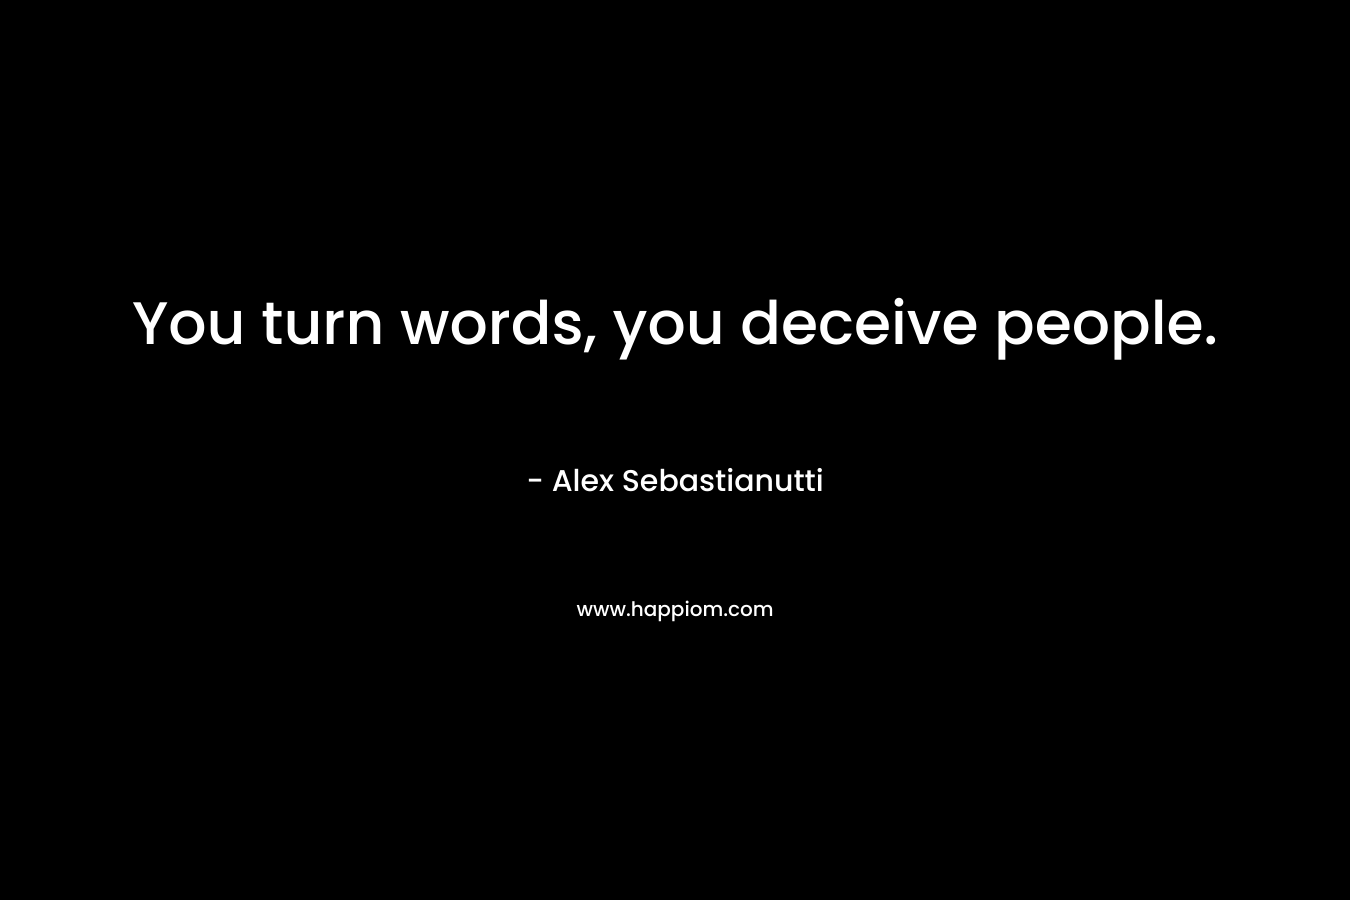 You turn words, you deceive people.